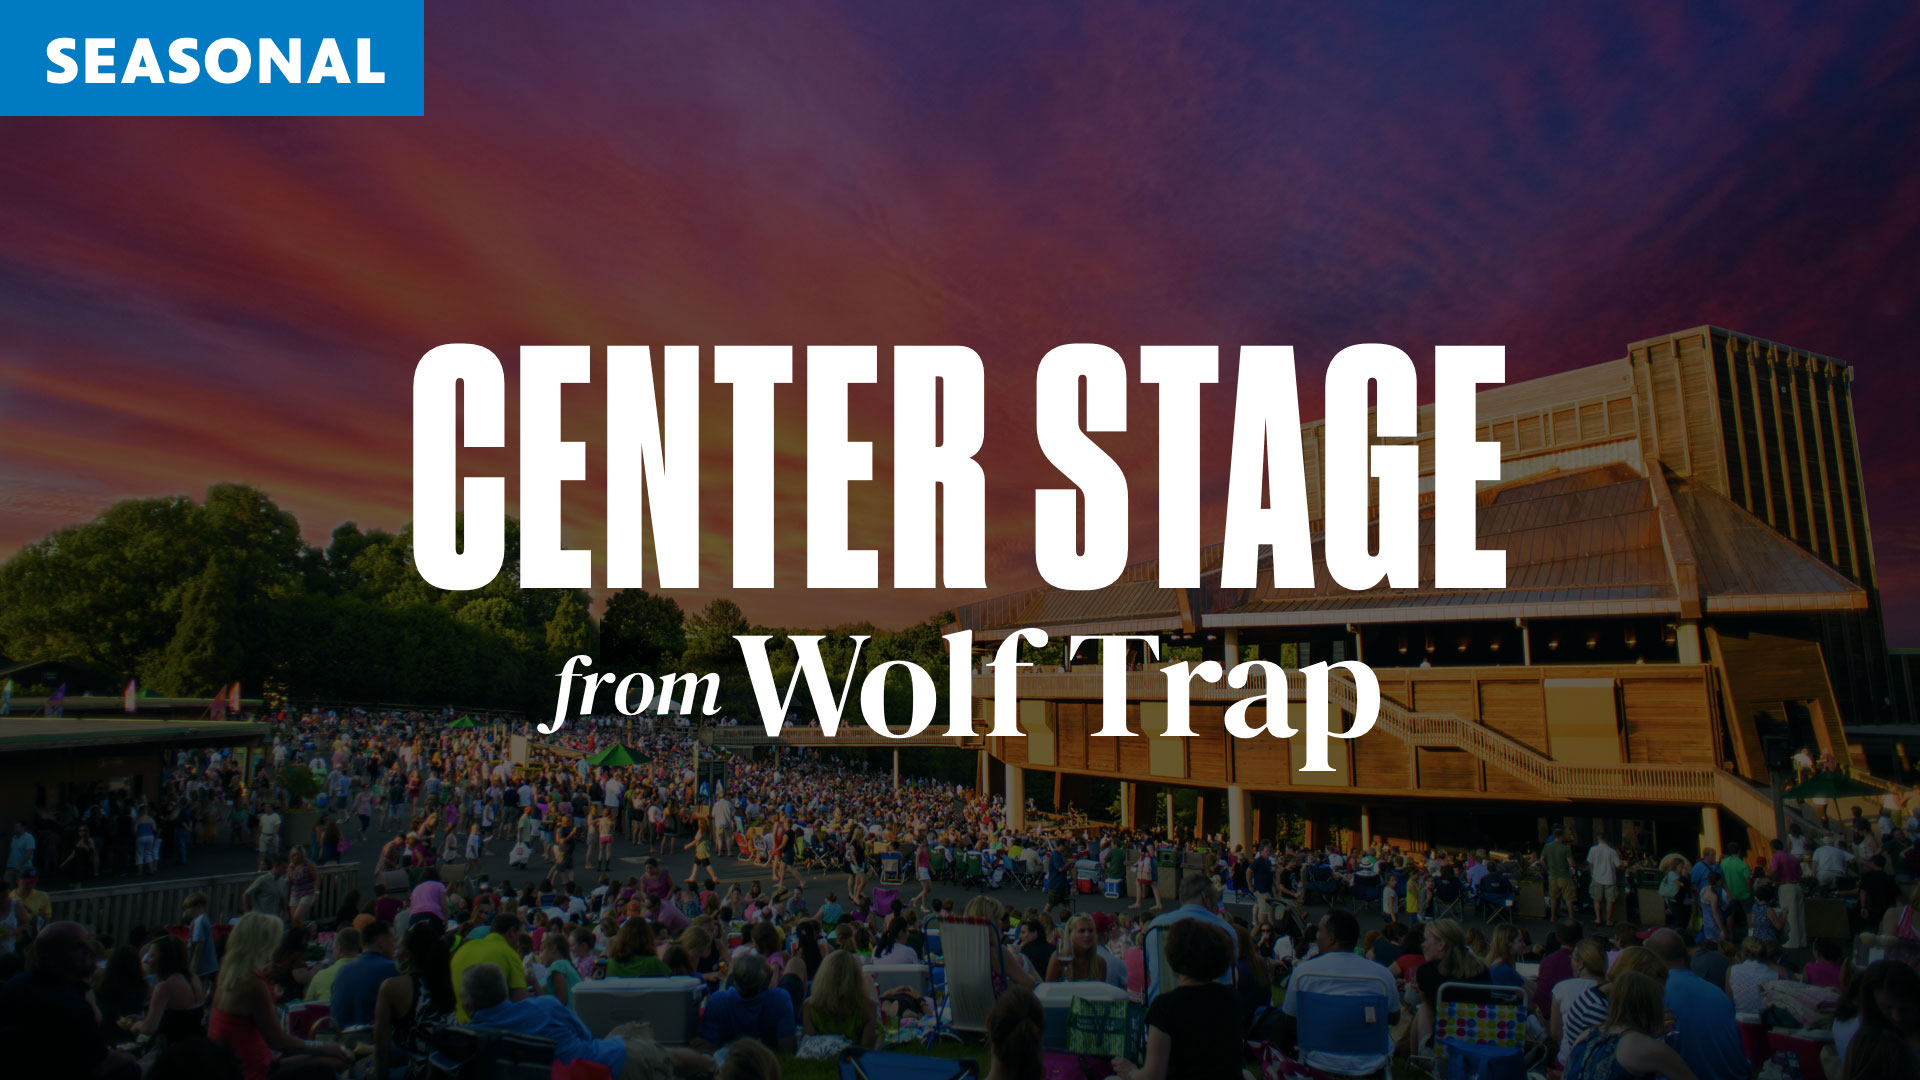 Center Stage from Wolf Trap